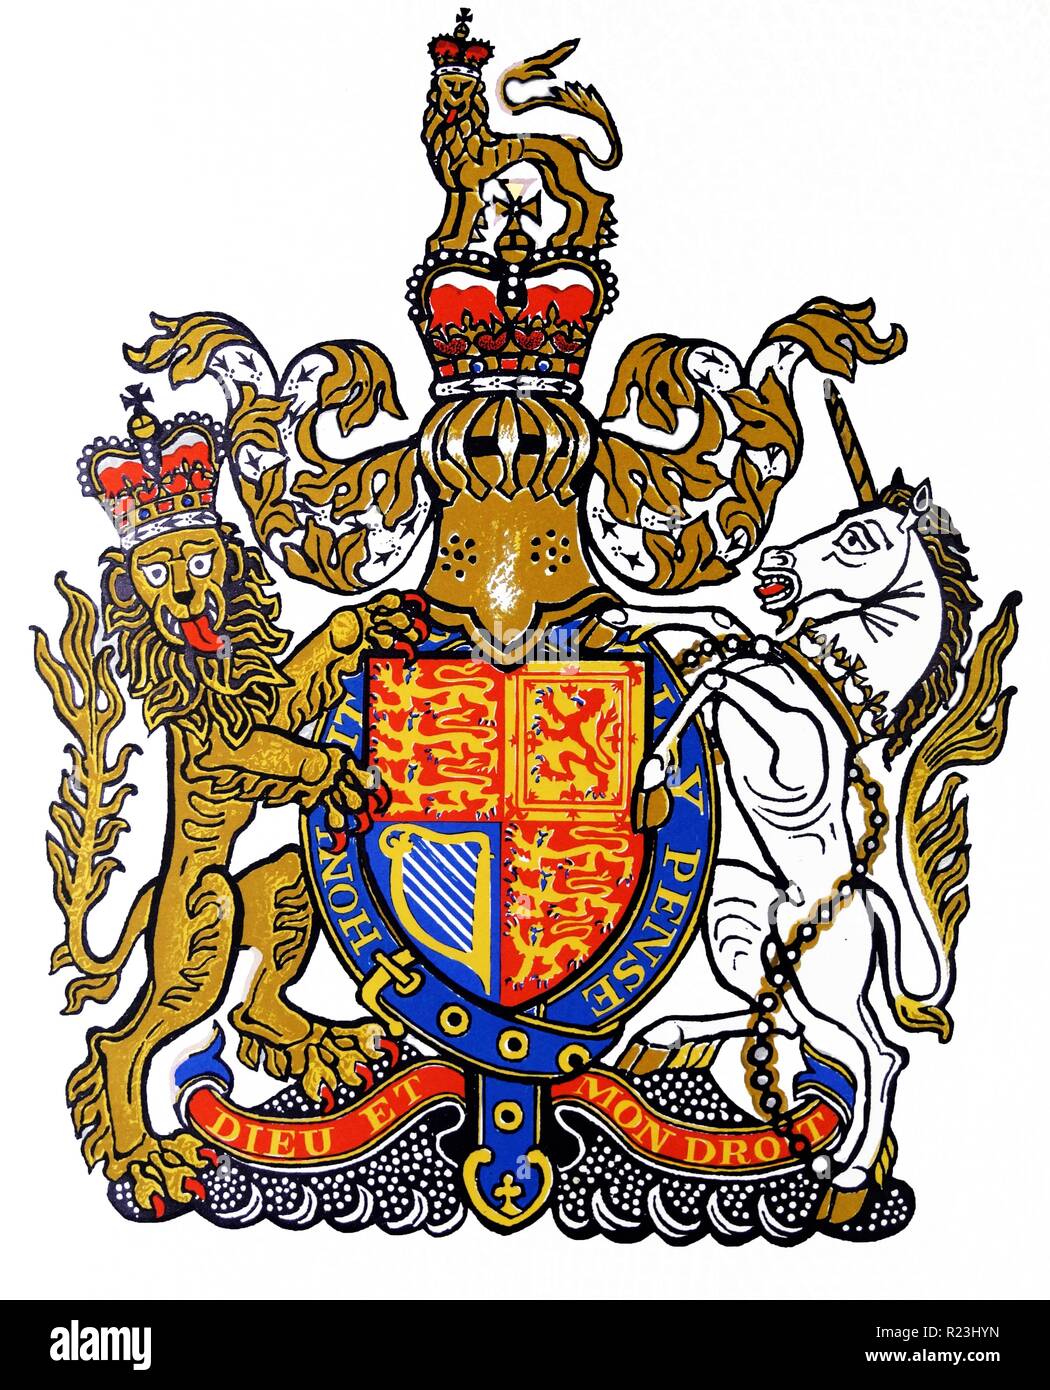 The coat of arms of the British monarch bearing the motto of English monarchs, Dieu et mon droit (God and my right). Drawn by Edward Bawden CBE RA (1903 - 1989) was an English graphic artist. Stock Photo